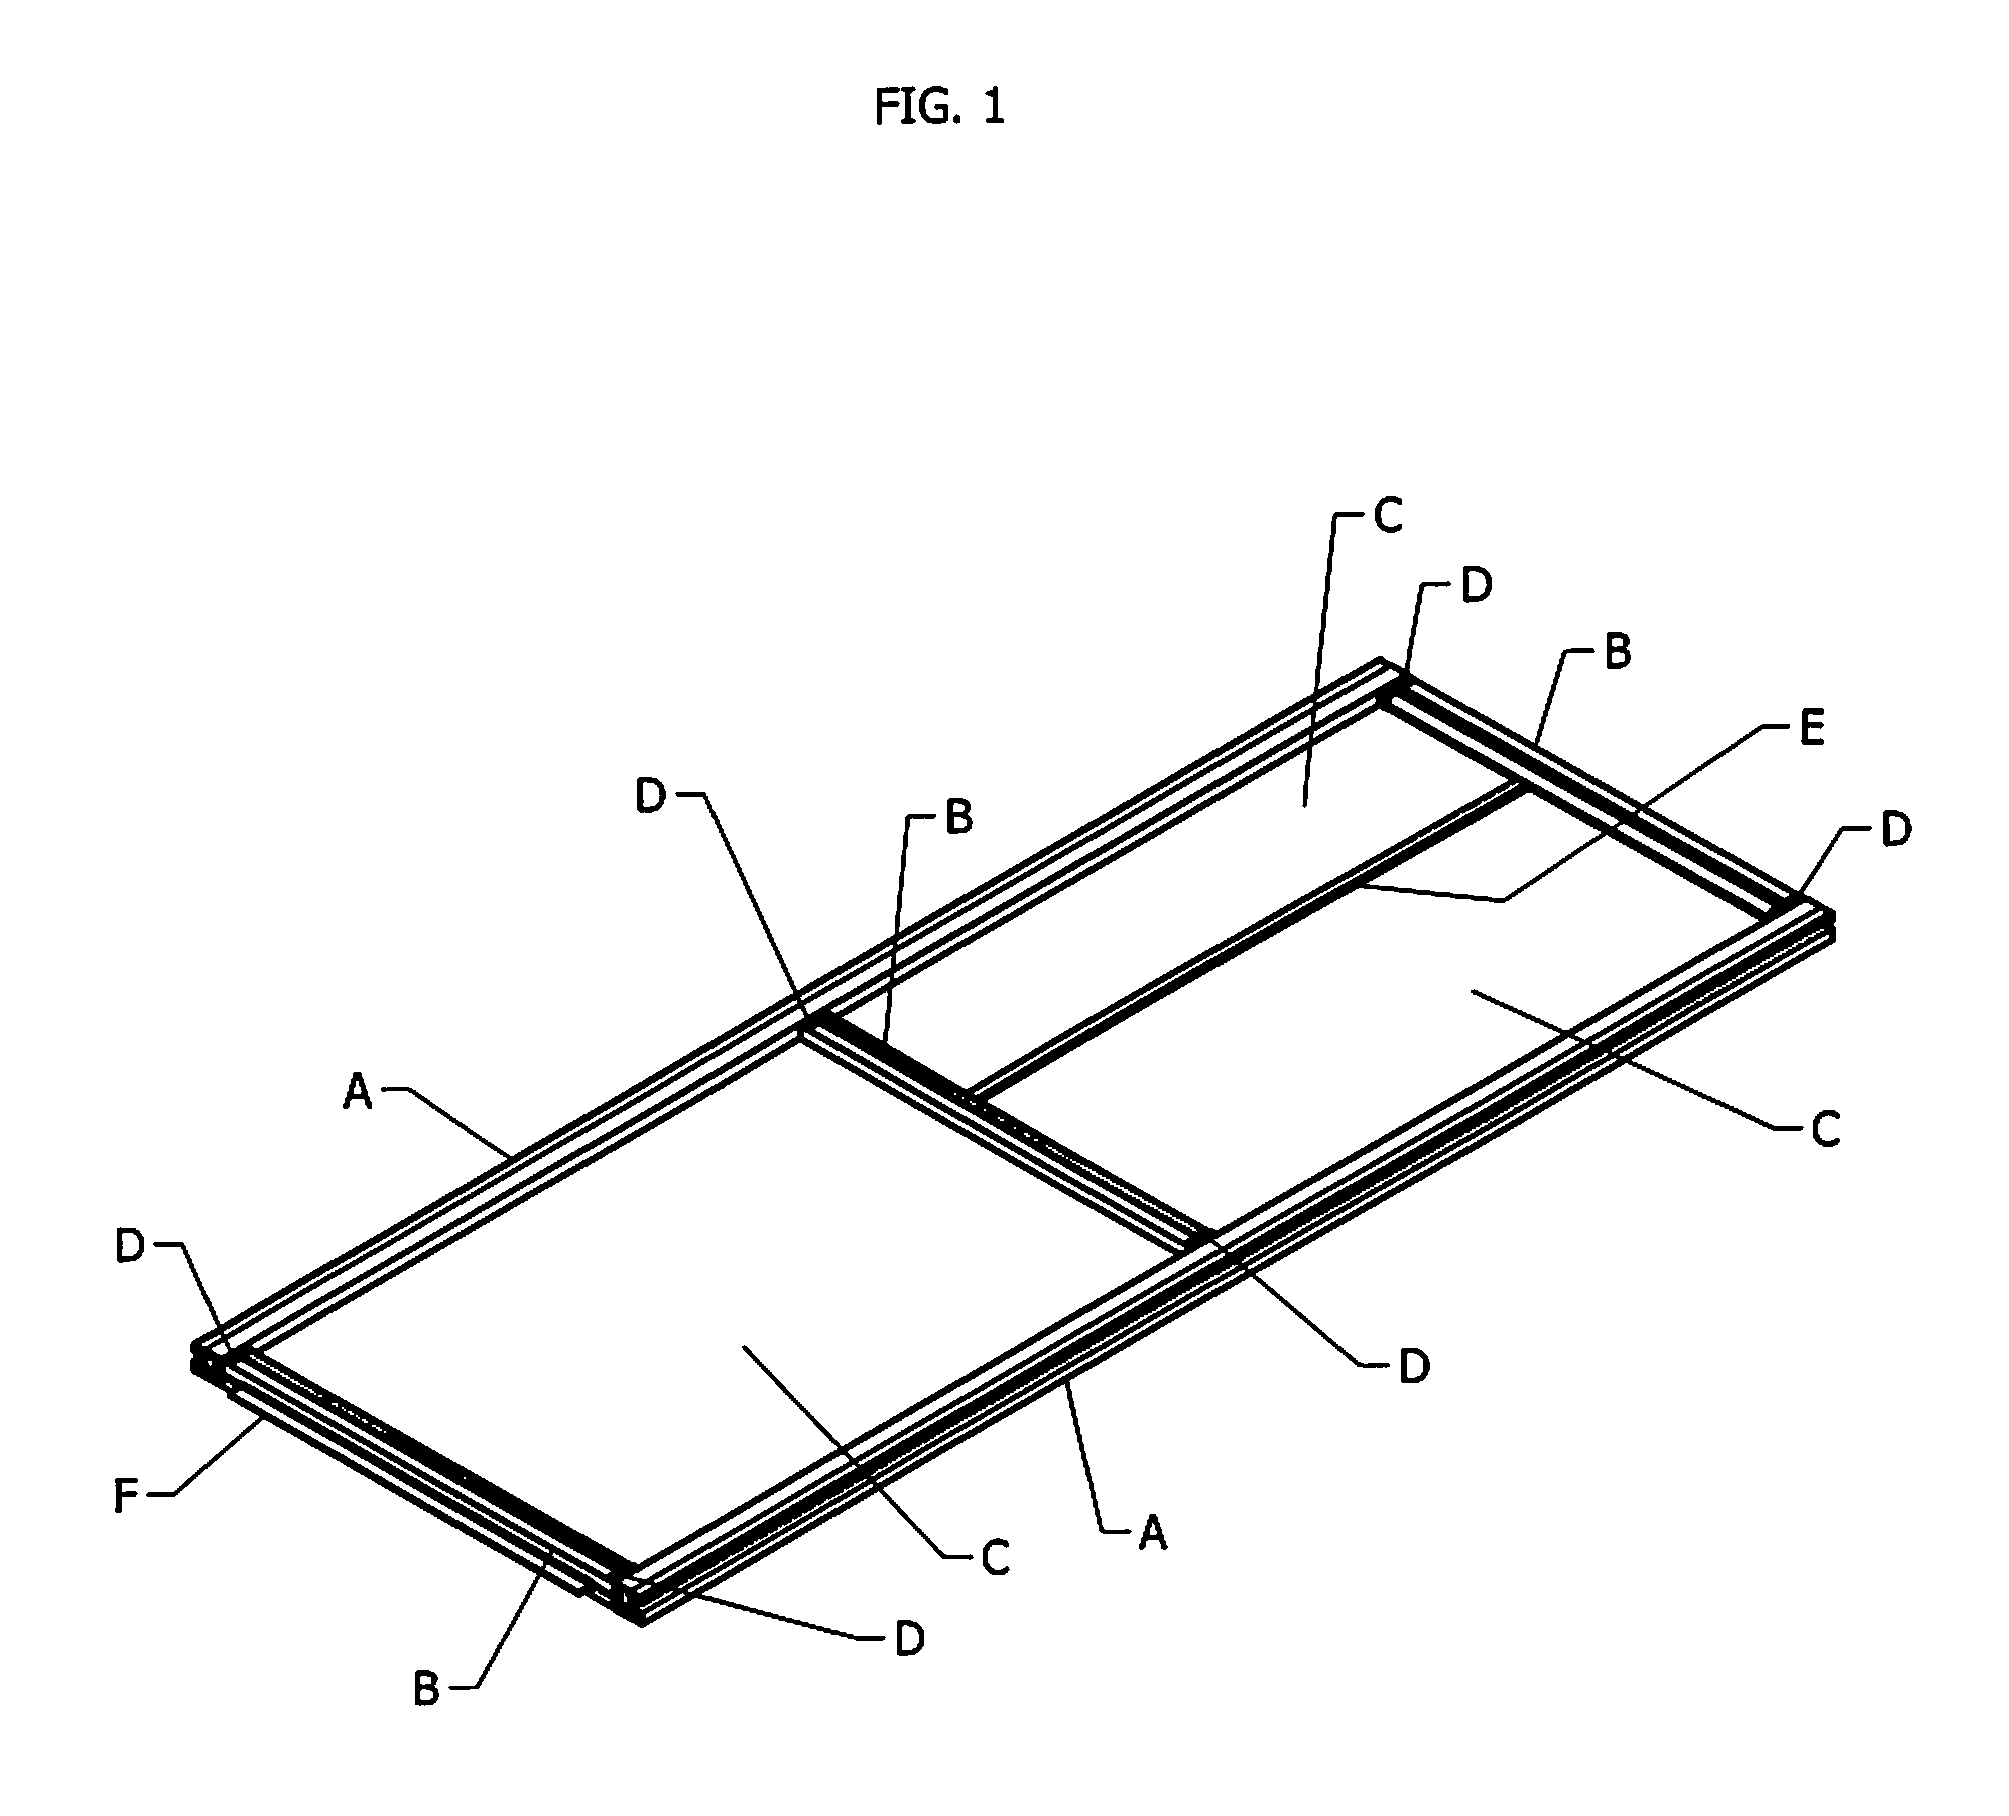 Mountable, Demountable and Adjustable by the User Screen Comprising a Frame Assembly Having Connectors and Rigid or Semi-Rigid Panels Within the Framework